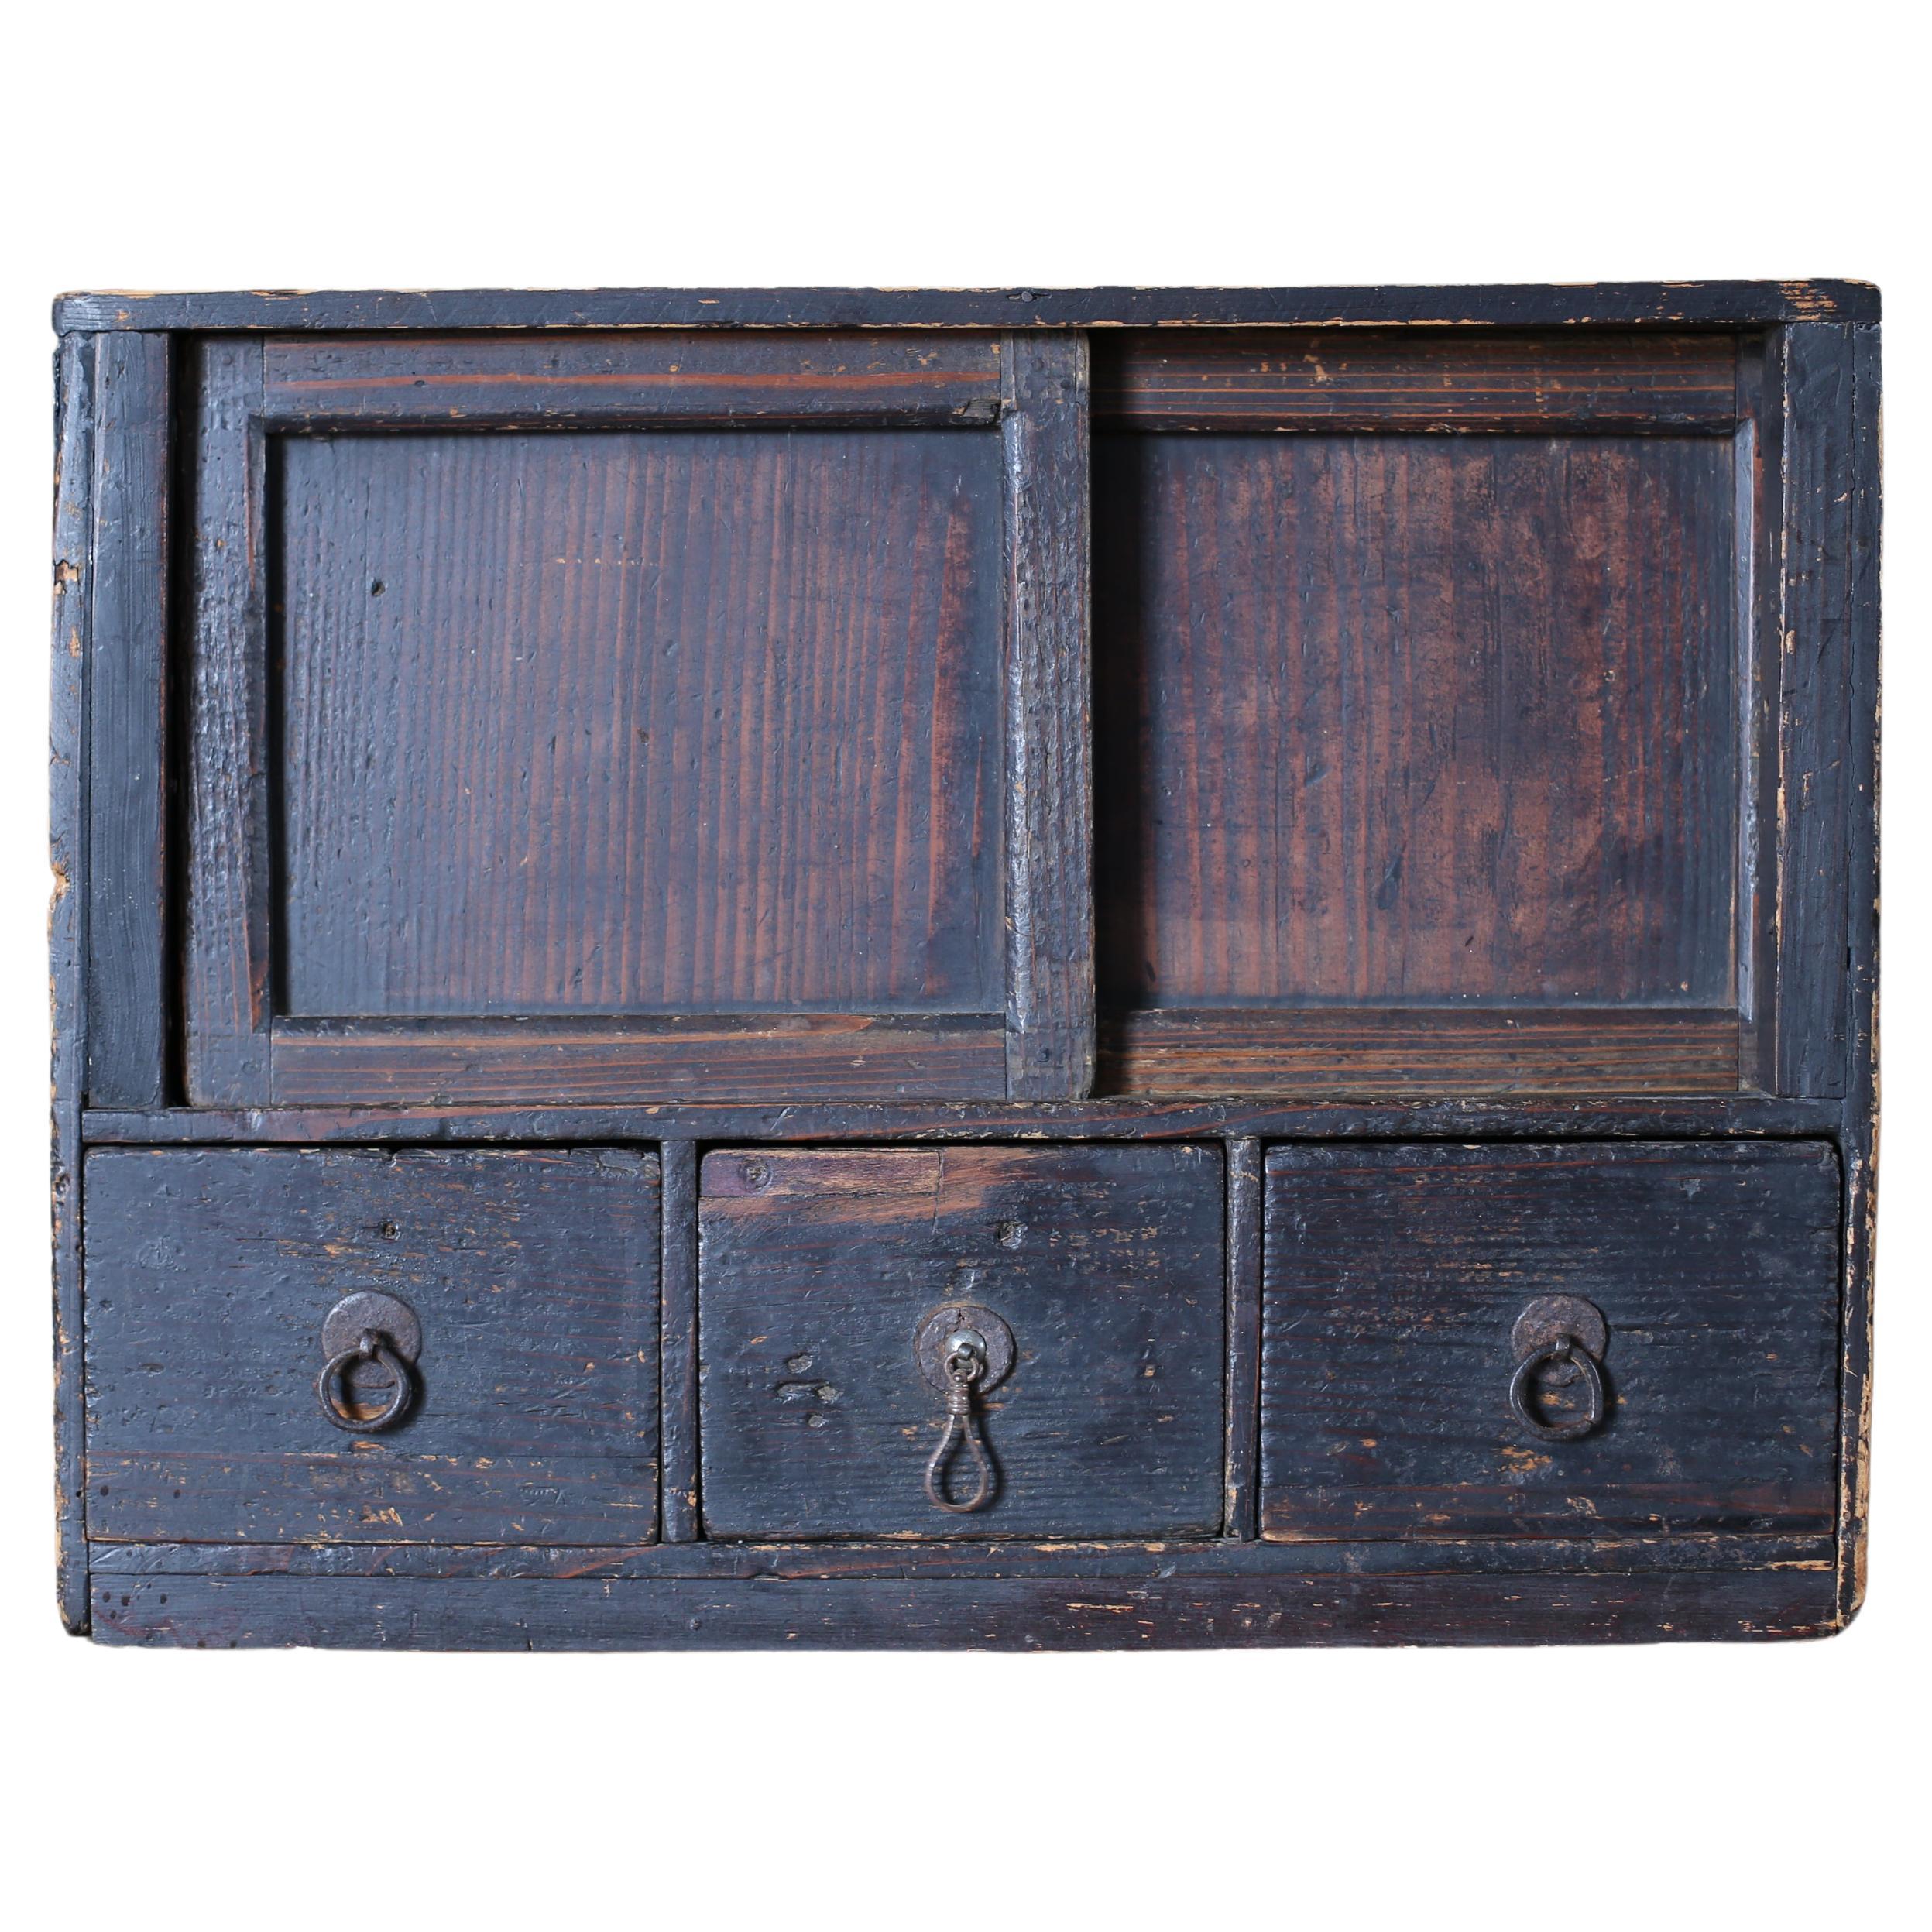 Japanese Antique Black Chests of Drawers, 1800s-1860s / with Sliding Door